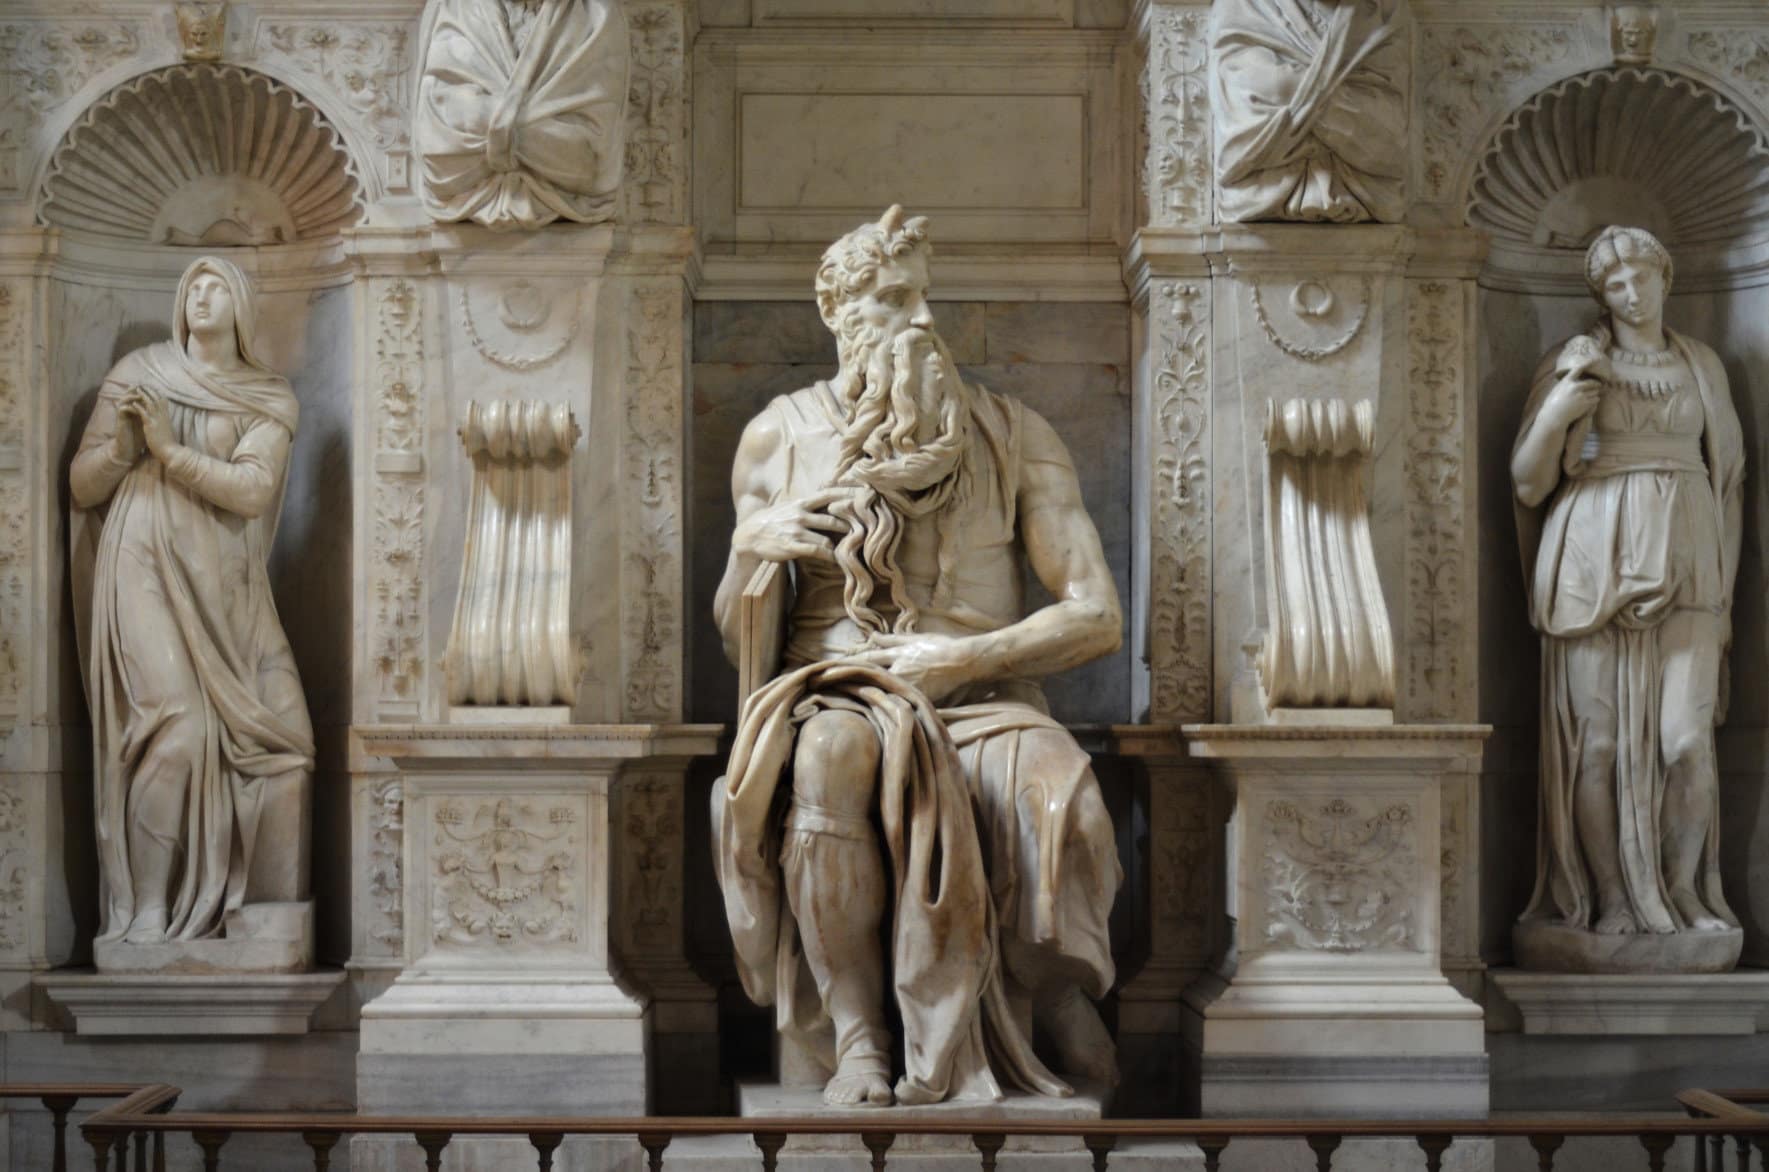 One-of-the-most-famous-sculptures-in-the-world-Moses-by-Michelangelo-located-in-San-Pietro-in-Vincoli-basilica-in-Rome-Italy.jpg